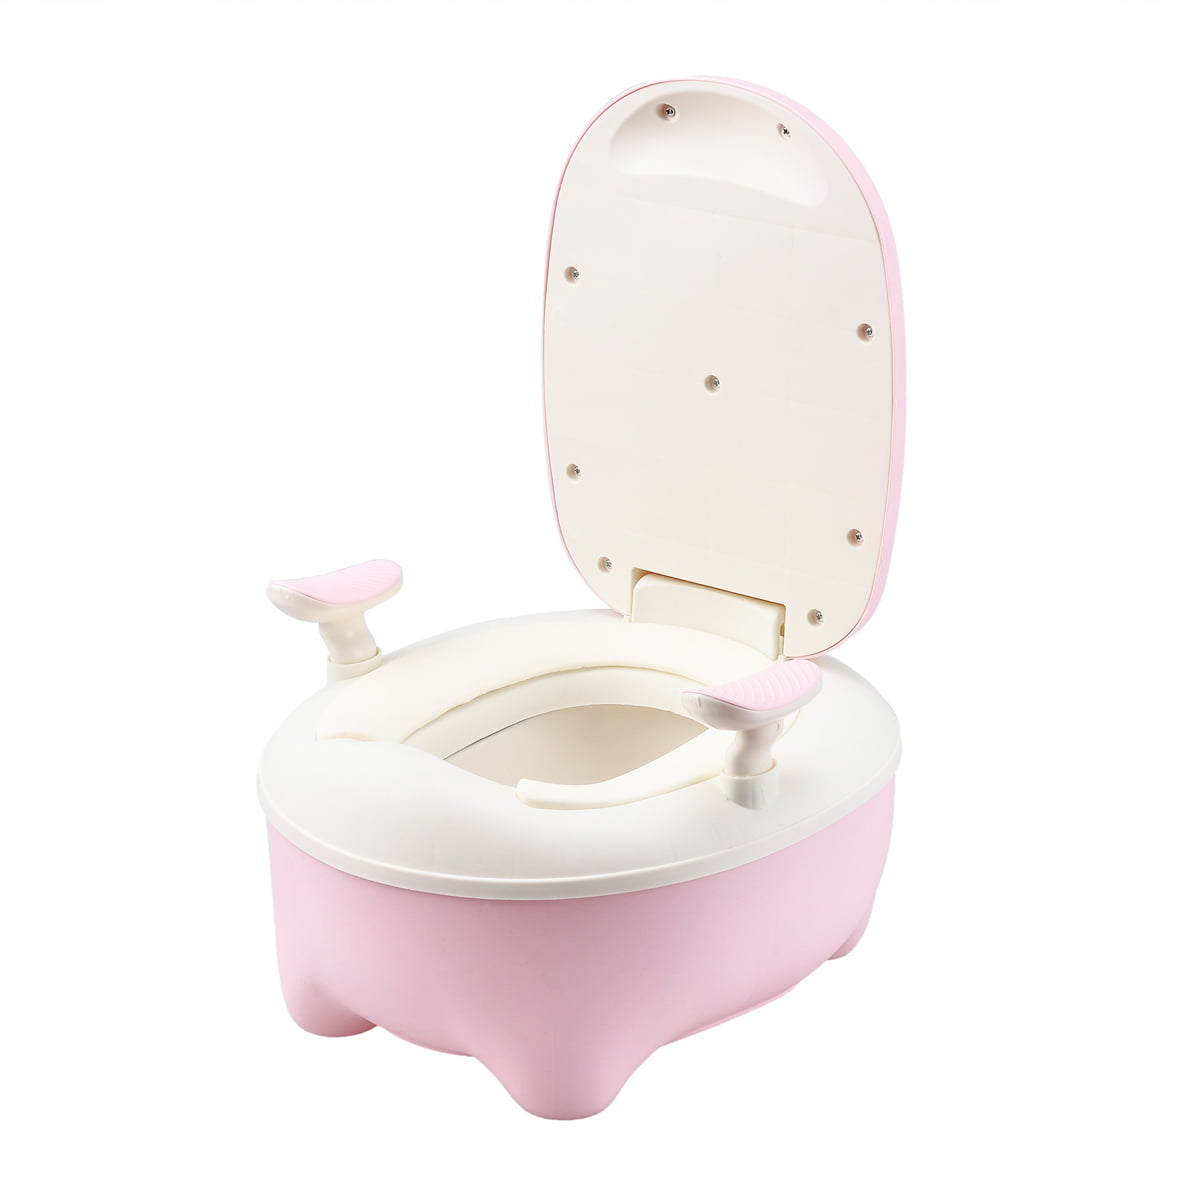 2 in 1 Kids Baby Toilet Seat Toddler Training Potty Trainer Safety Chair Urinal 